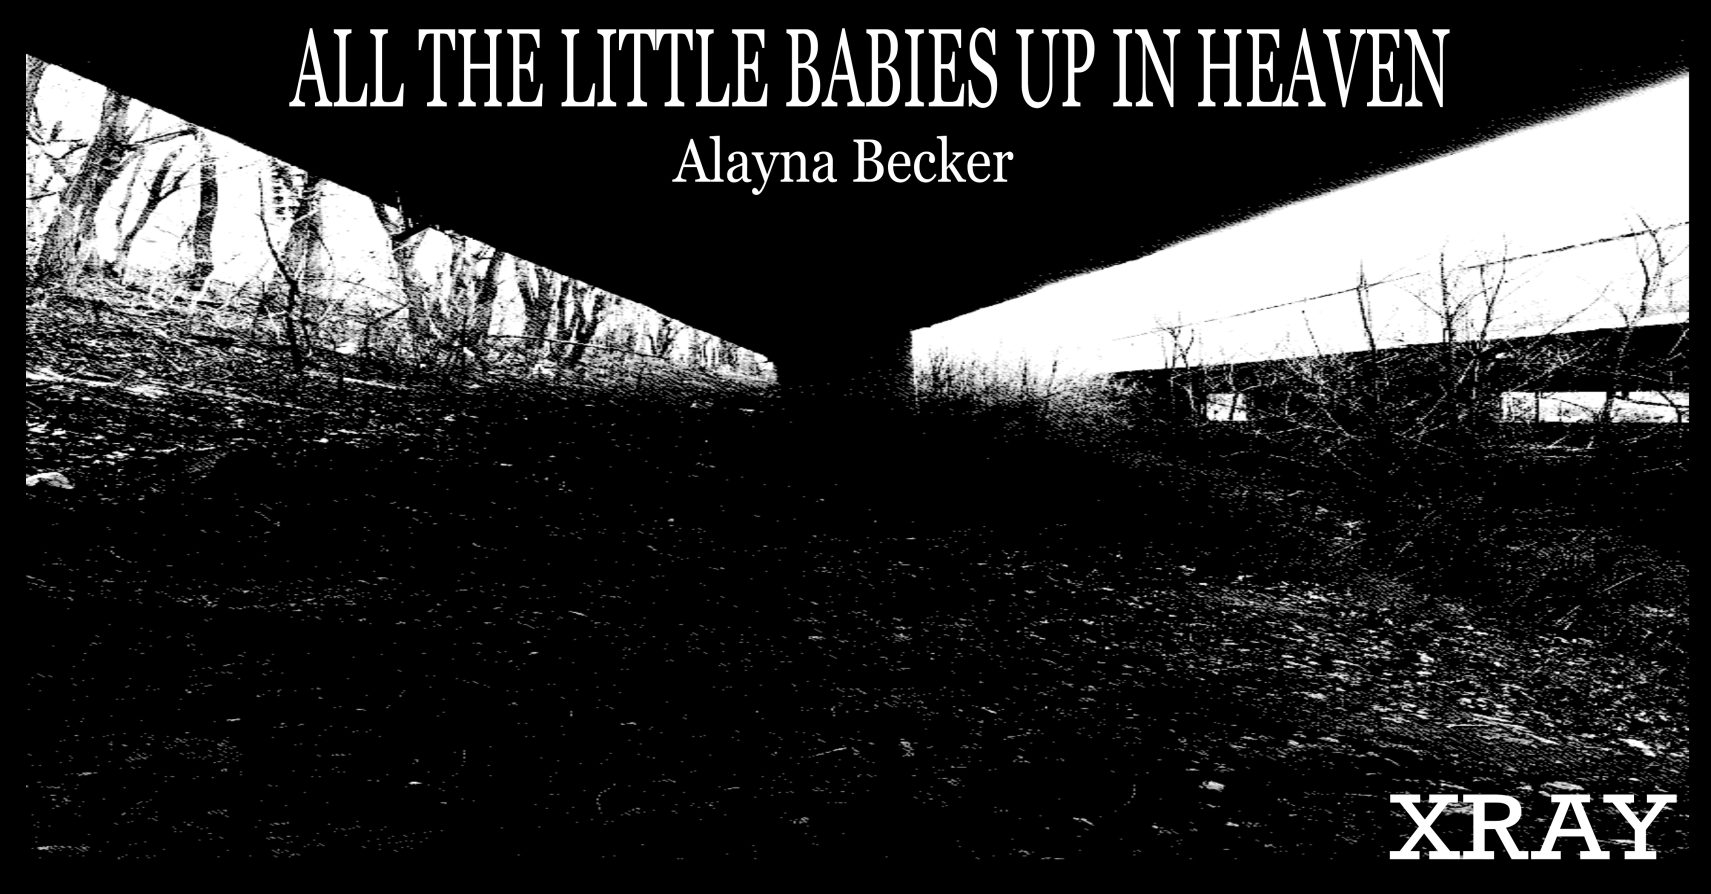 ALL THE LITTLE BABIES UP IN HEAVEN by Alayna Becker